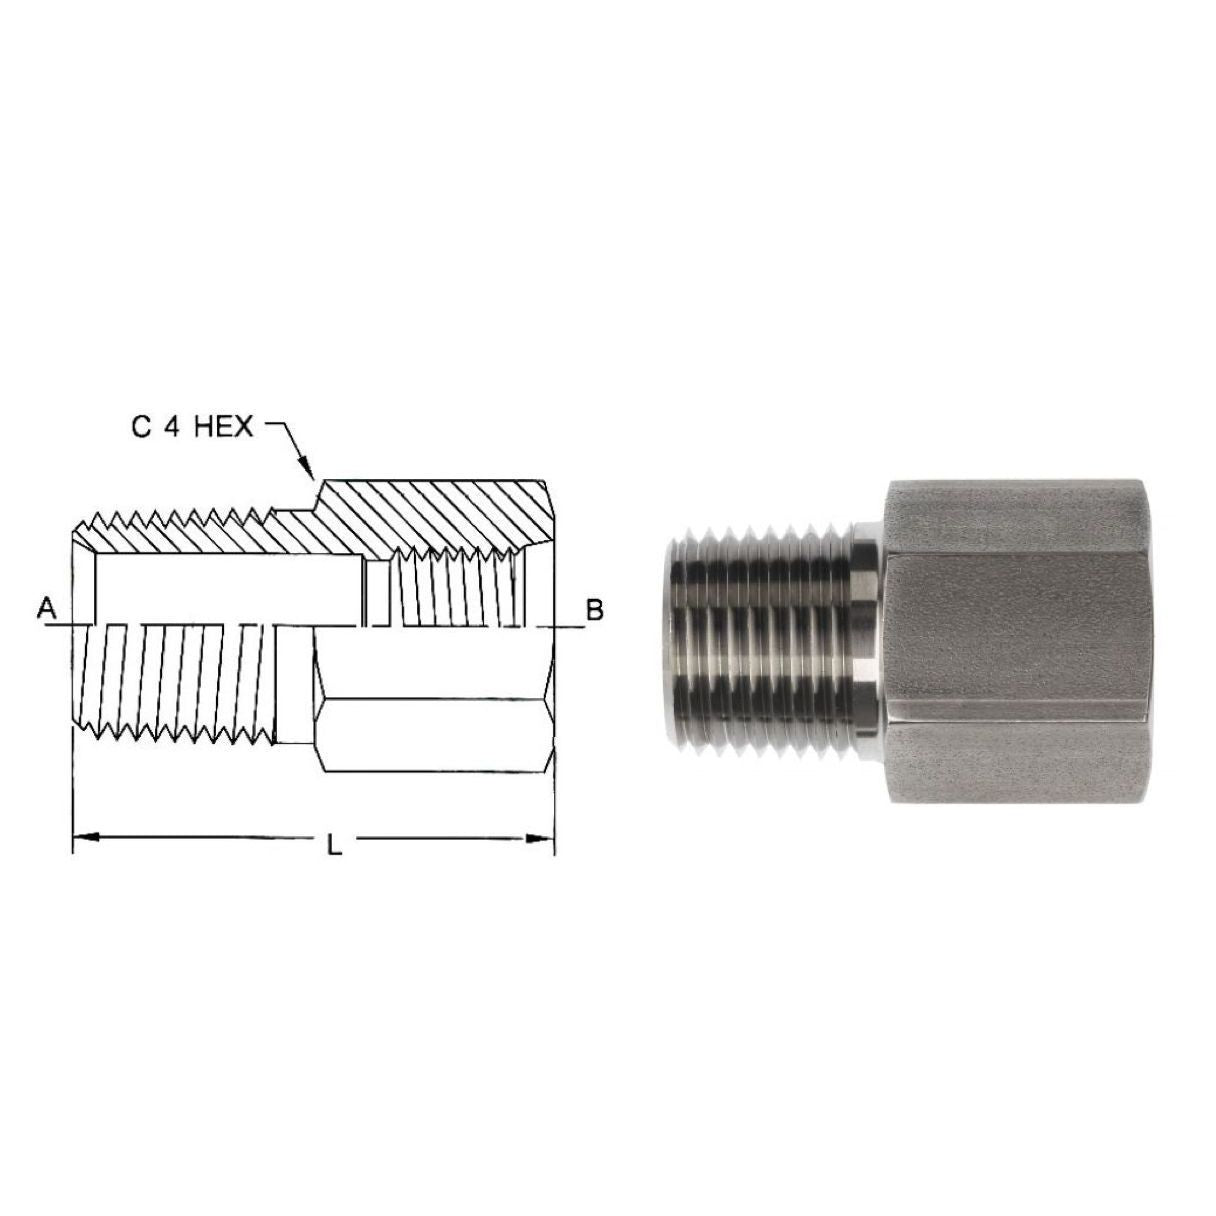 6404-10-12 : OneHydraulics Adapter, Straight, 0.625 (5/8") Female ORB x 0.75 (3/4") Male, Steel, 4500psi